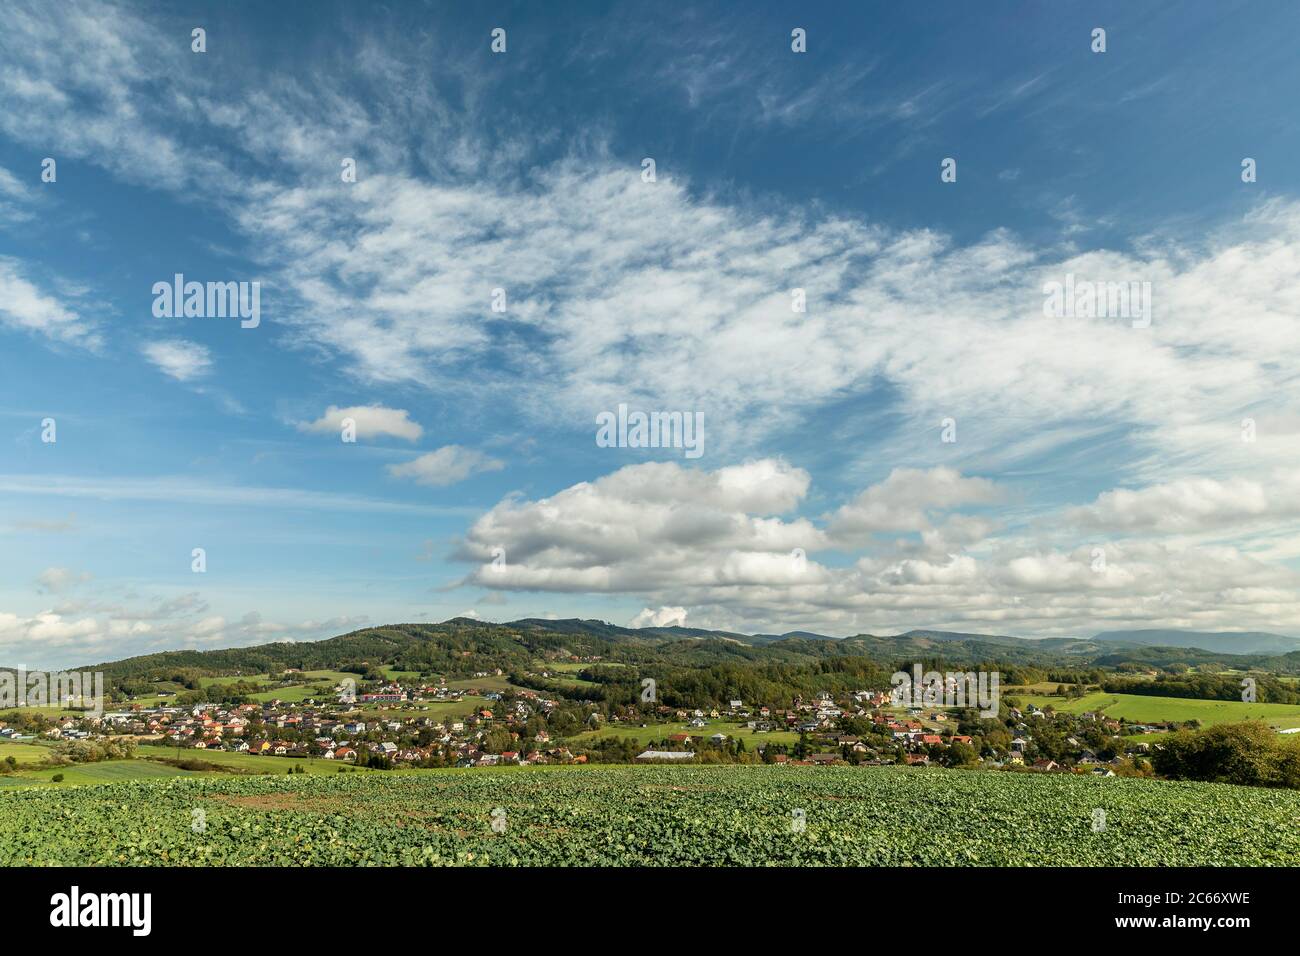 Fast moving clouds in the sky captured during a sunny day overlooking the village and the high hills and mountains in the background foreground from a Stock Photo